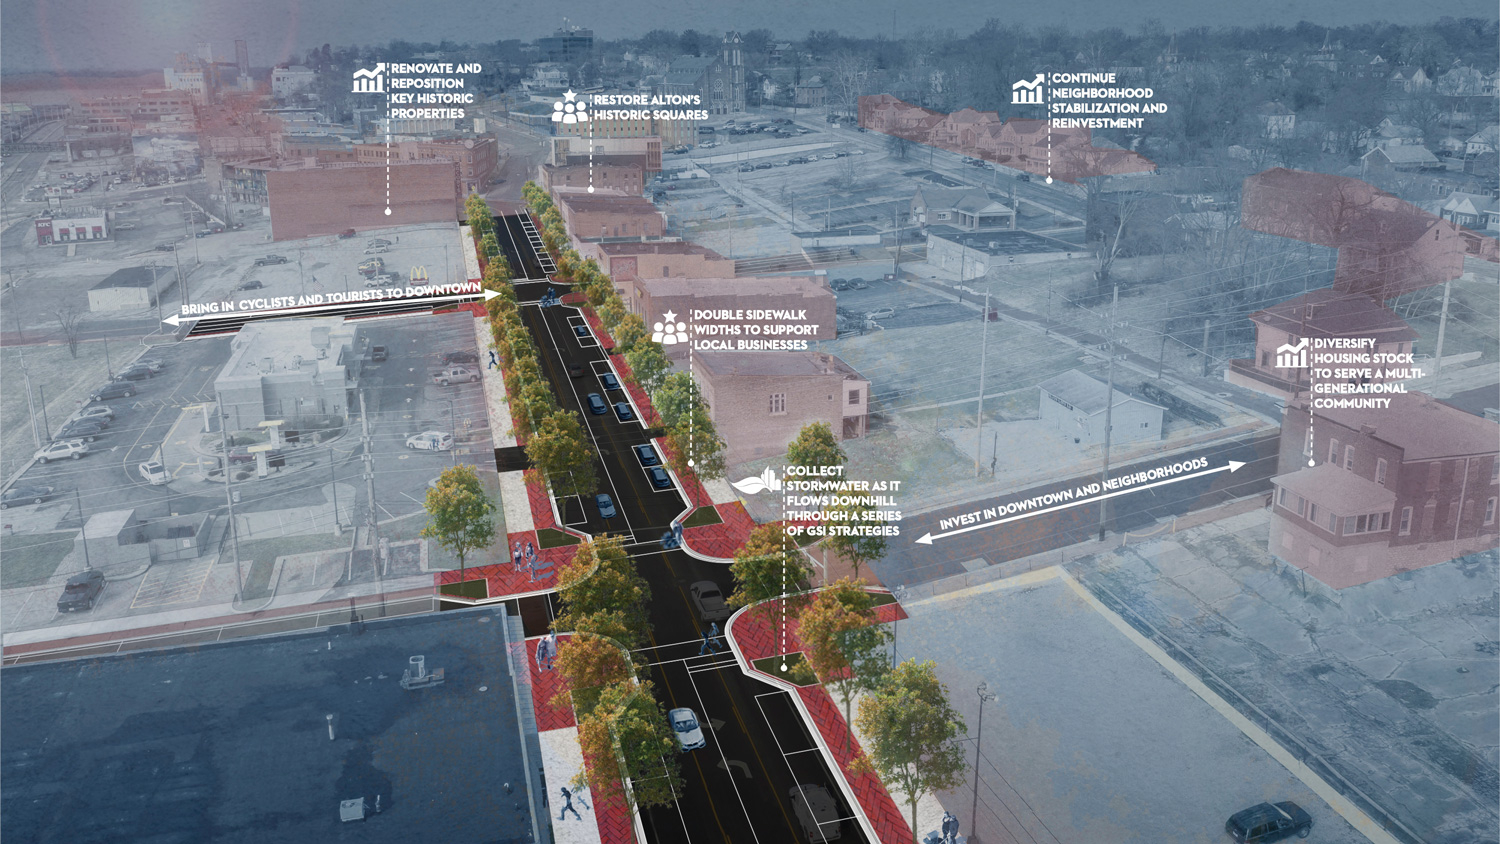 The Alton Great Streets project, located in the St. Louis region, employed drone technology during the pandemic to build 3-D models and quickly iterate and visualize alternative plans for virtual public workshops (image courtesy of Design Workshop).